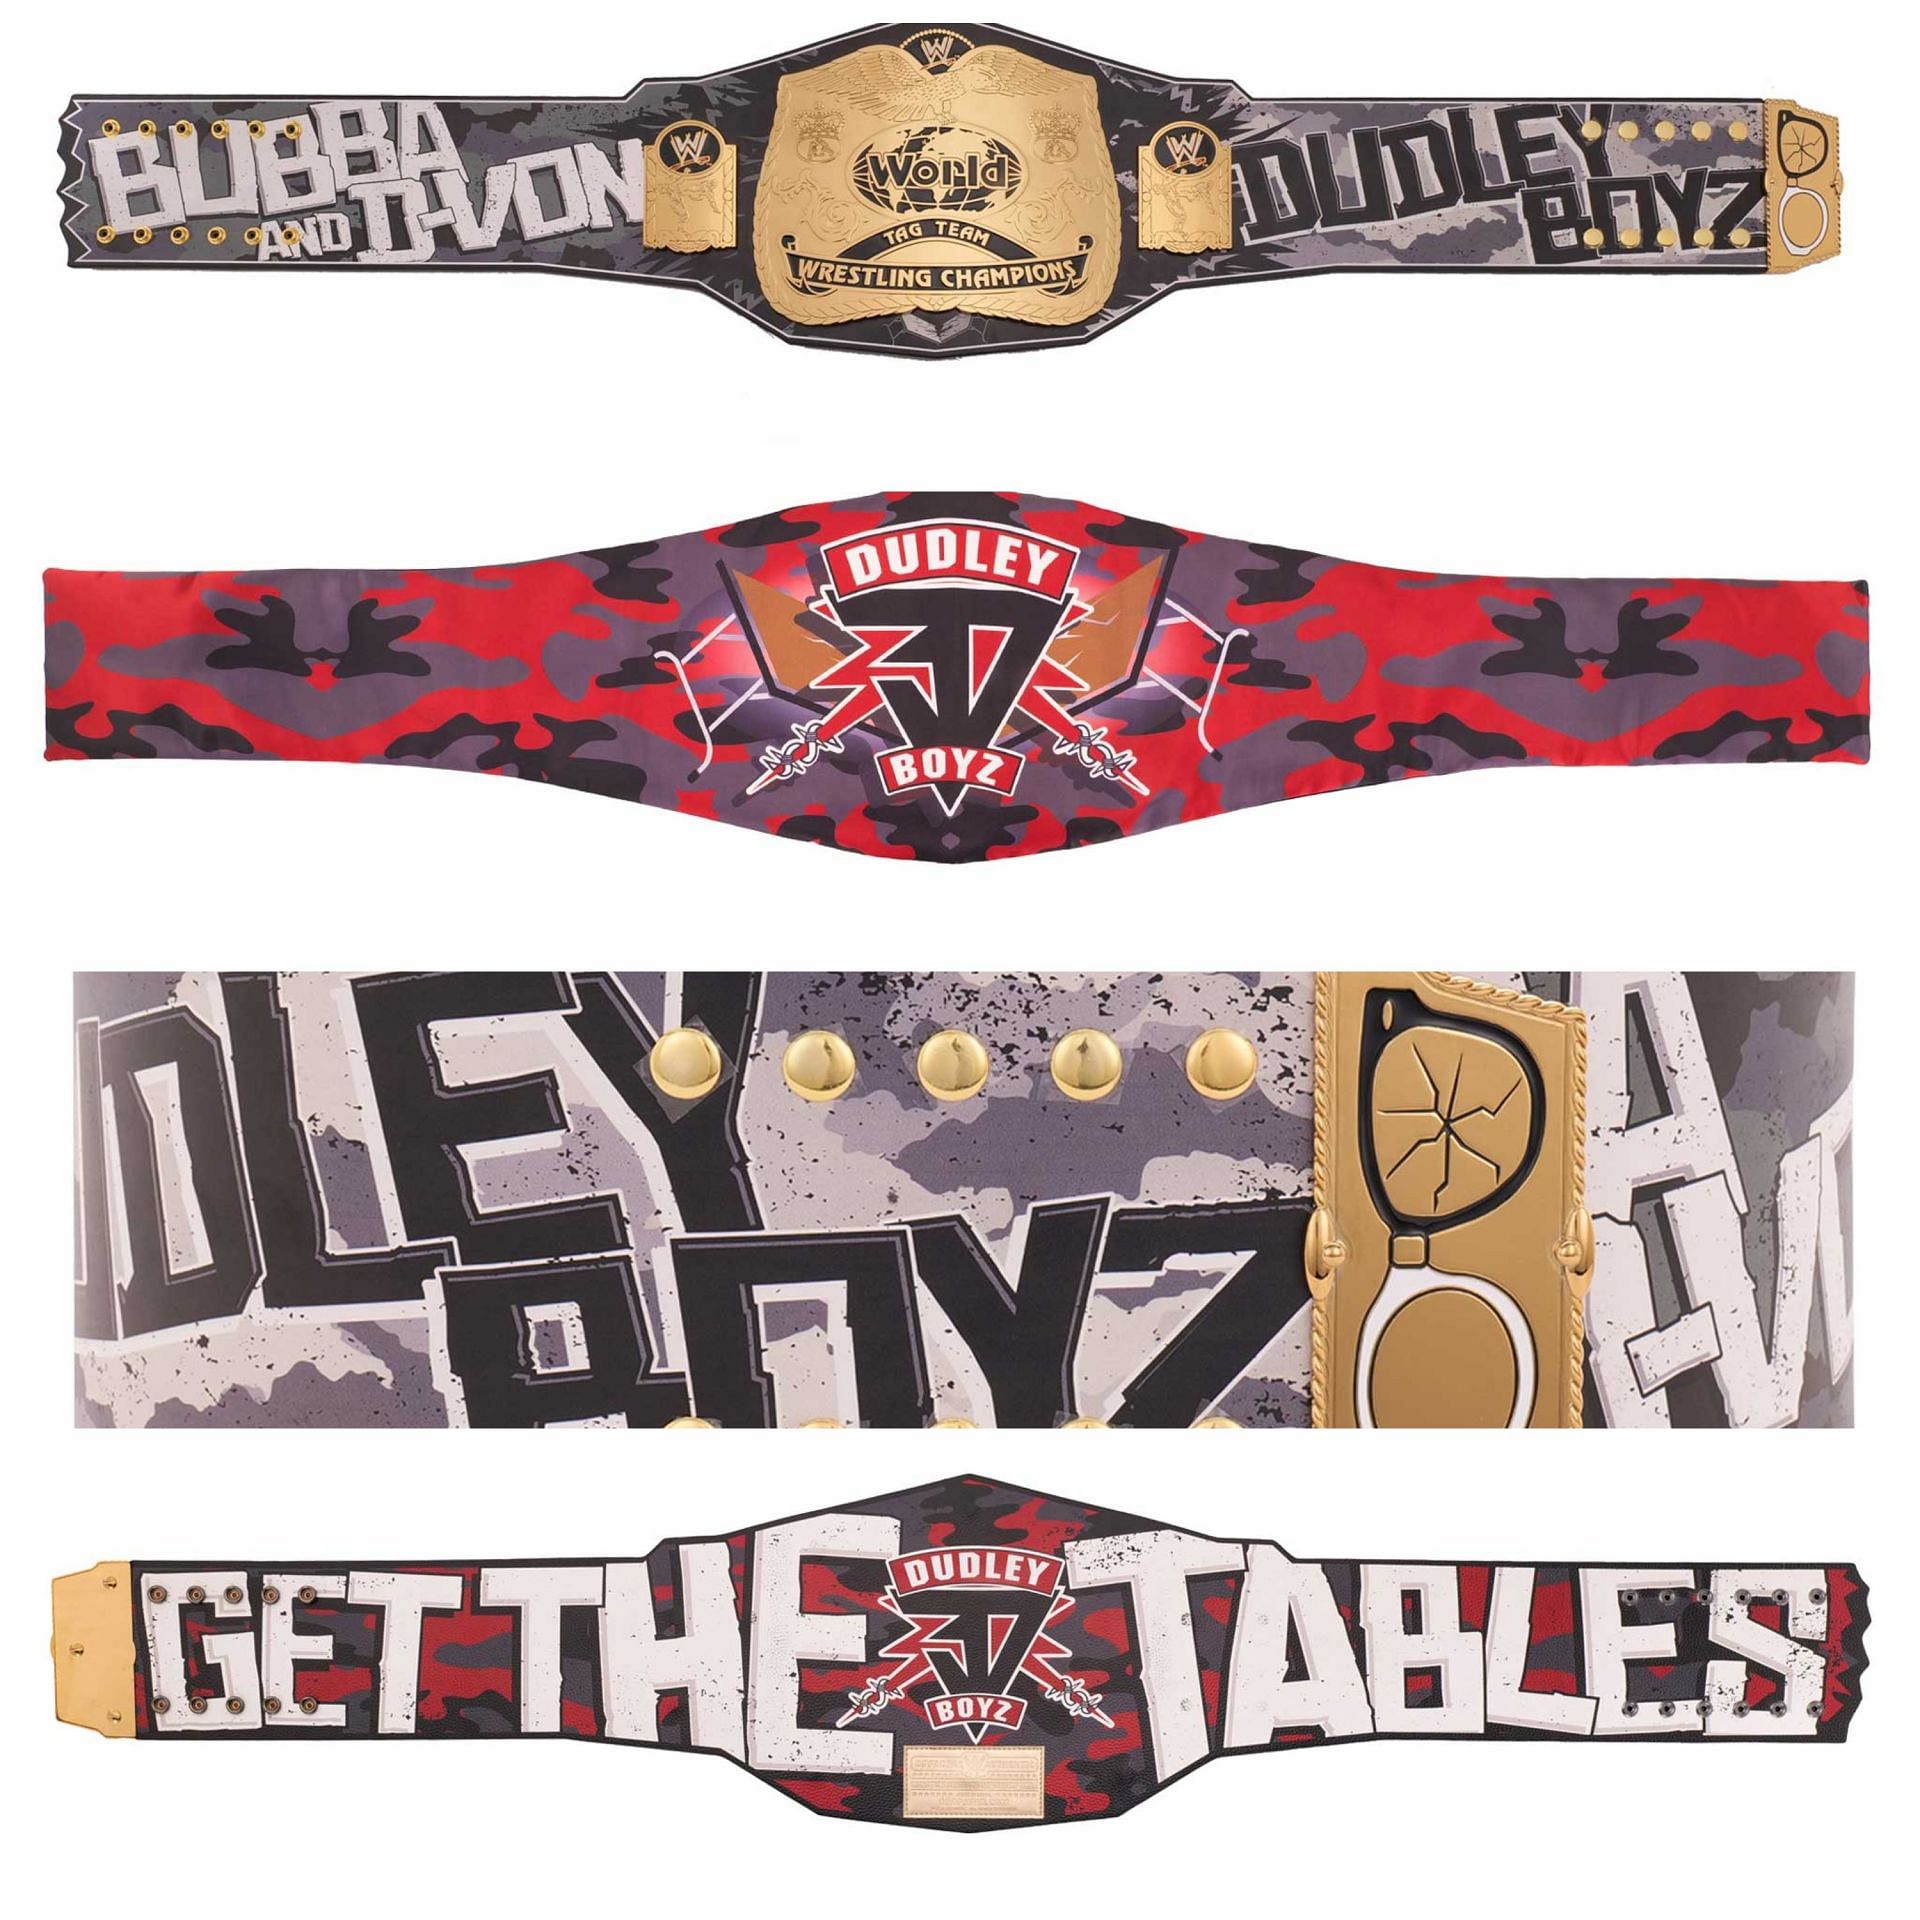 Photos of WWE Shop&#039;s Signature Series championship replicas for The Dudley Boyz